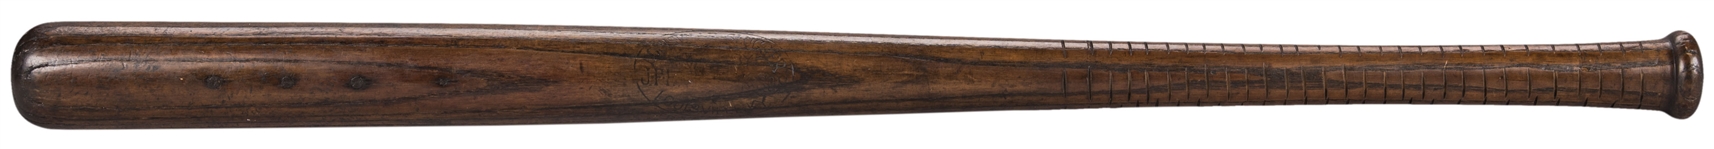 1897 Adrian "CAP" Anson Game Used J.F. Hillerich & Son Model Bat - His Last Game Used Bat - (PSA/DNA GU 10 & Letter of Provenance)- The ONLY Game Used Anson Bat in Existence!